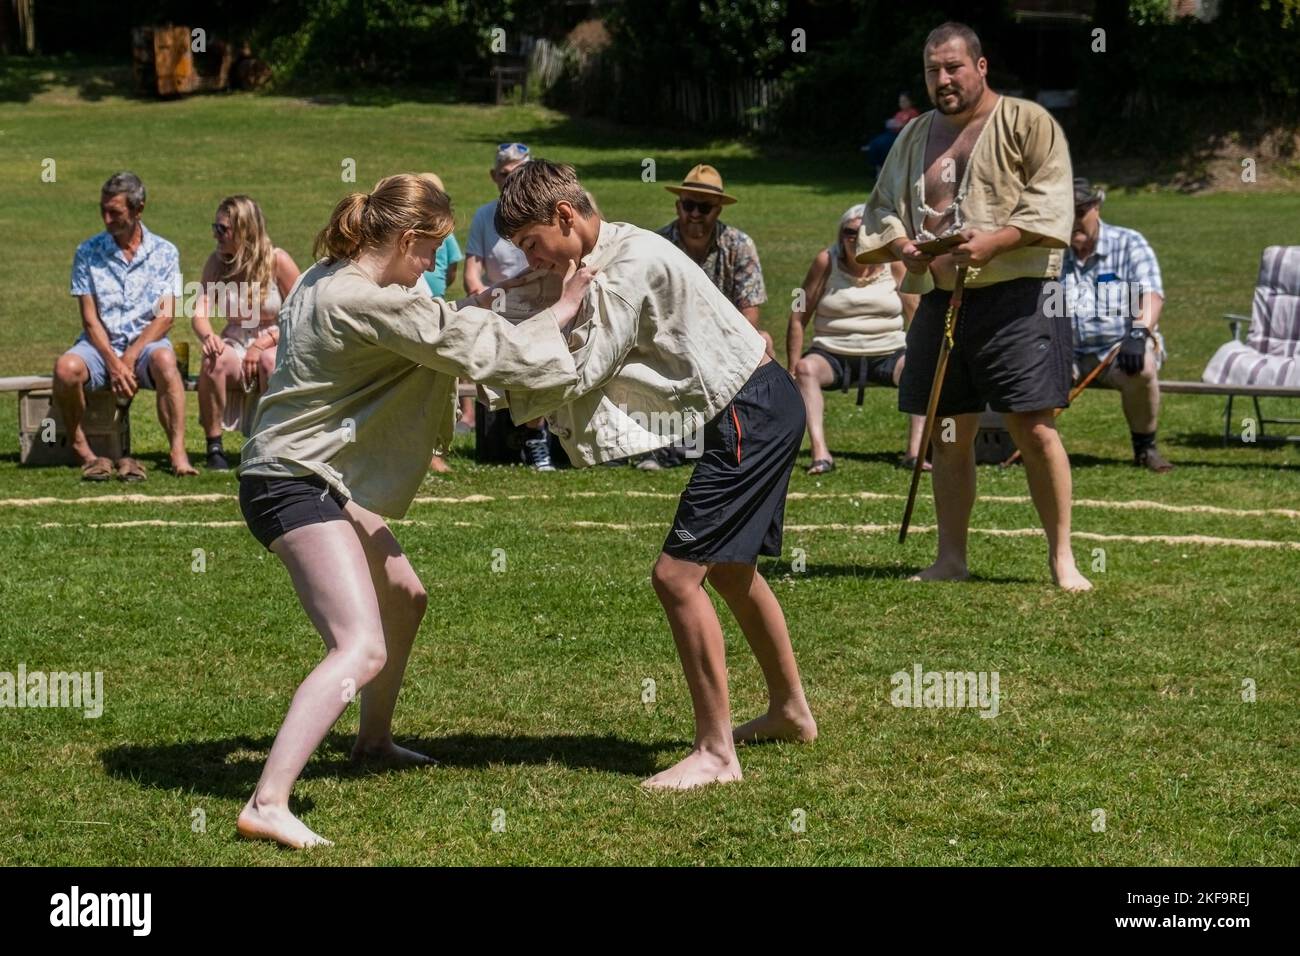 A judge referee Stickler watching a young teenage girl wrestling with a boy competing in the Grand Cornish Wrestling Tournament on the picturesque vil Stock Photo